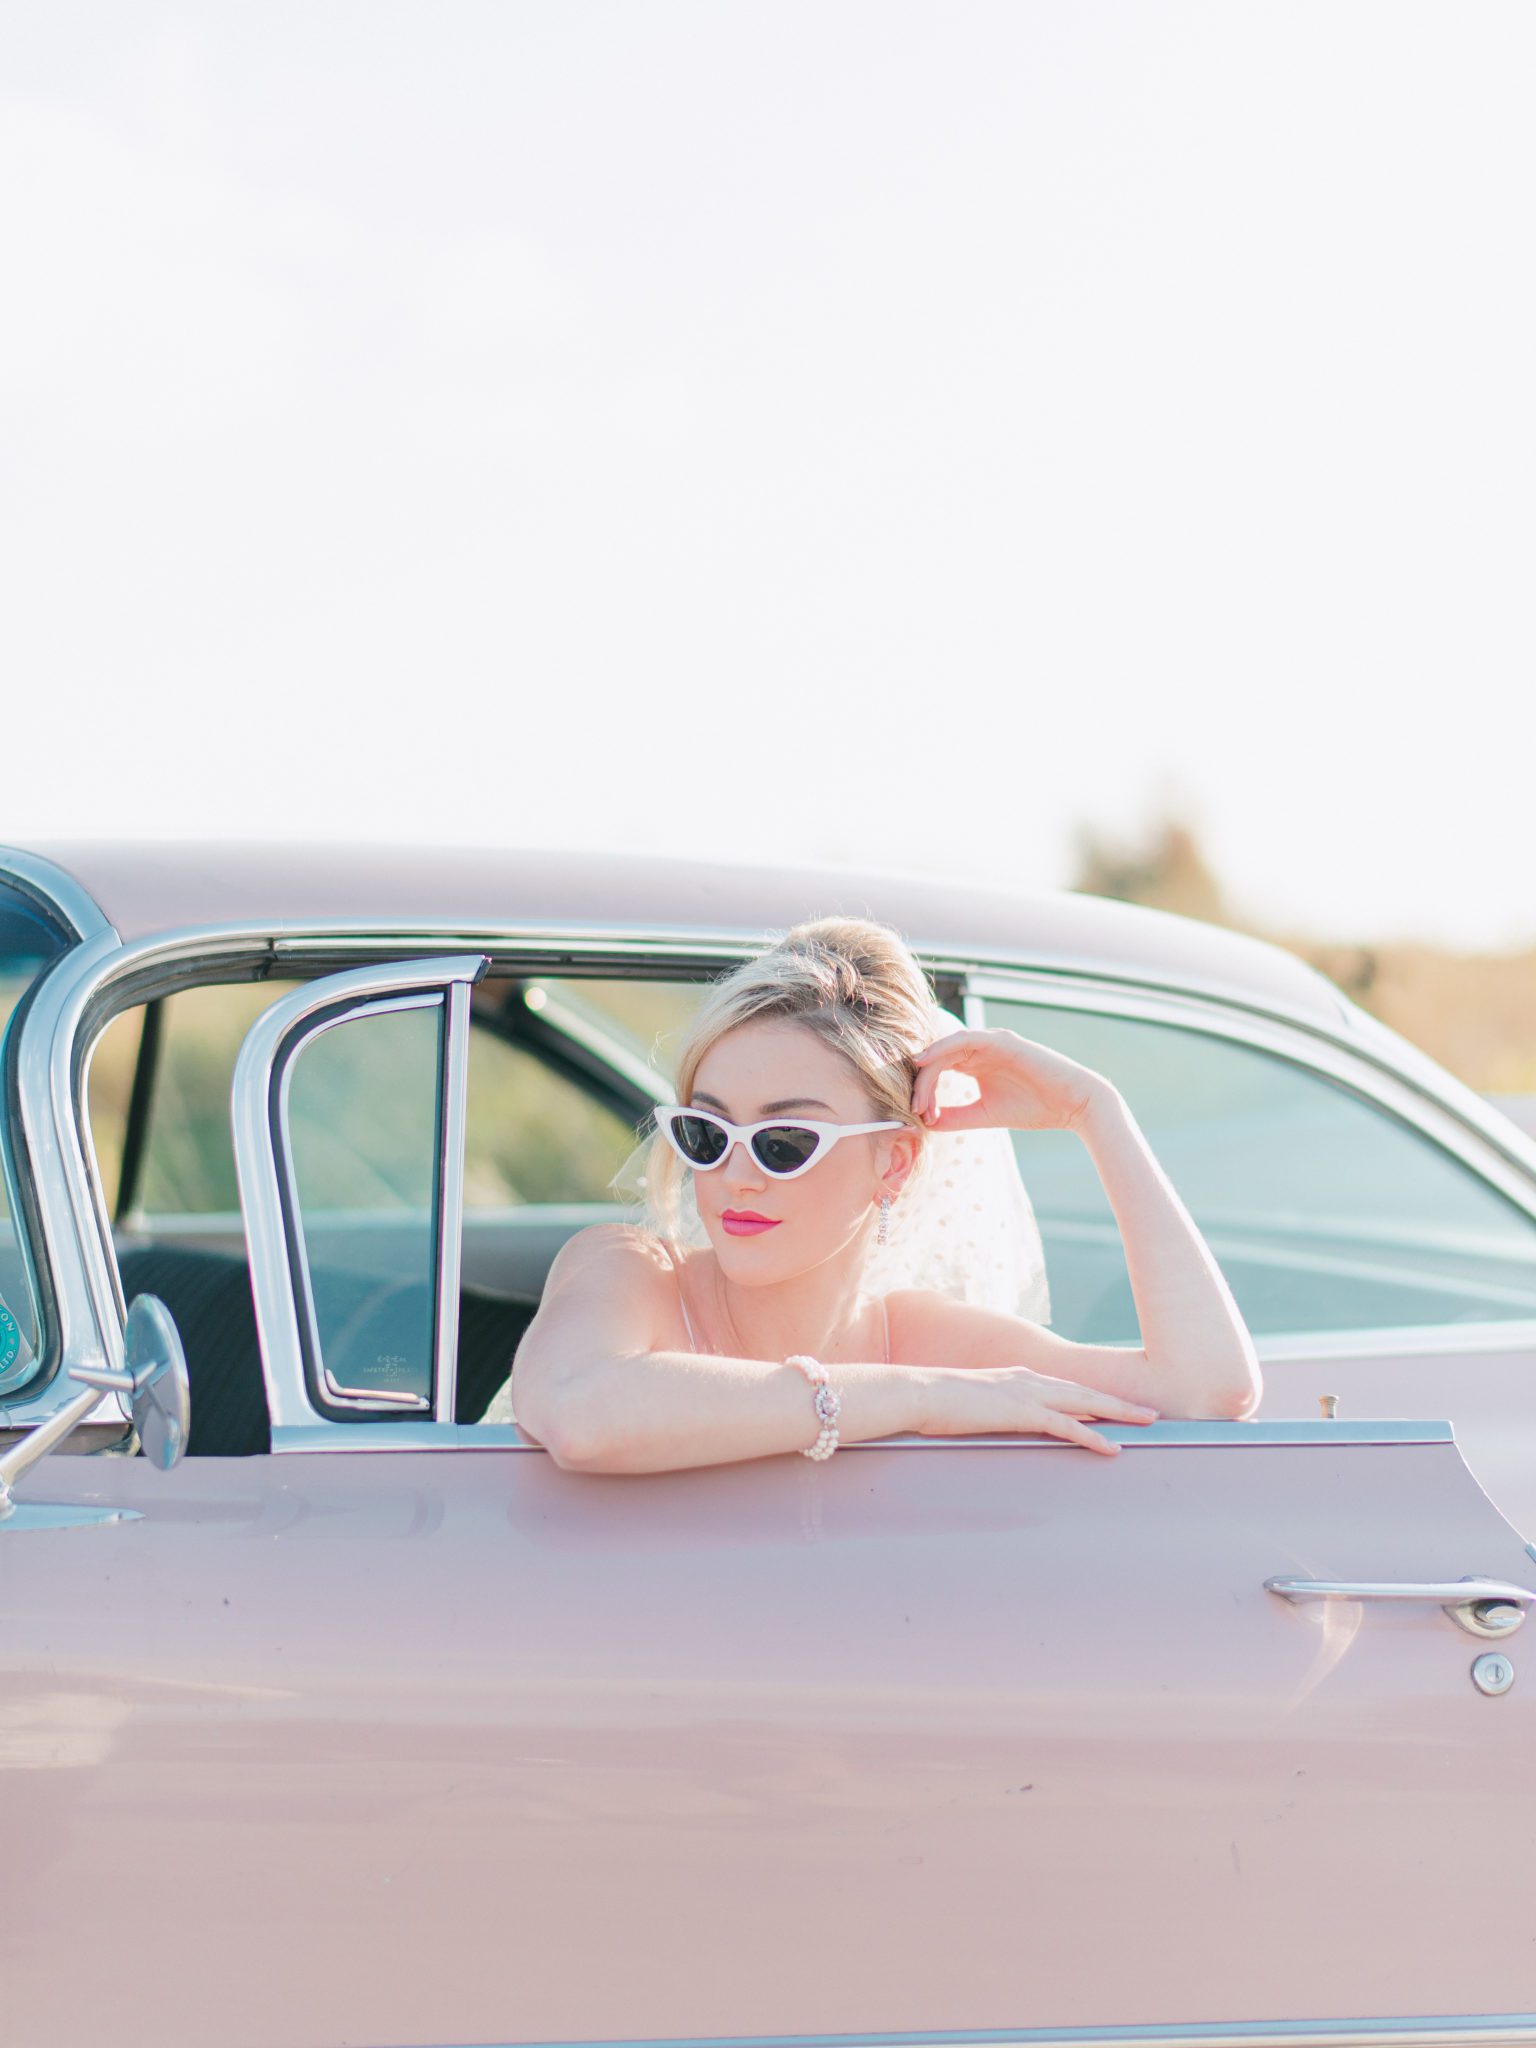 Coolest bridal vibes with cat-eye sunglasses in pink Cadillac